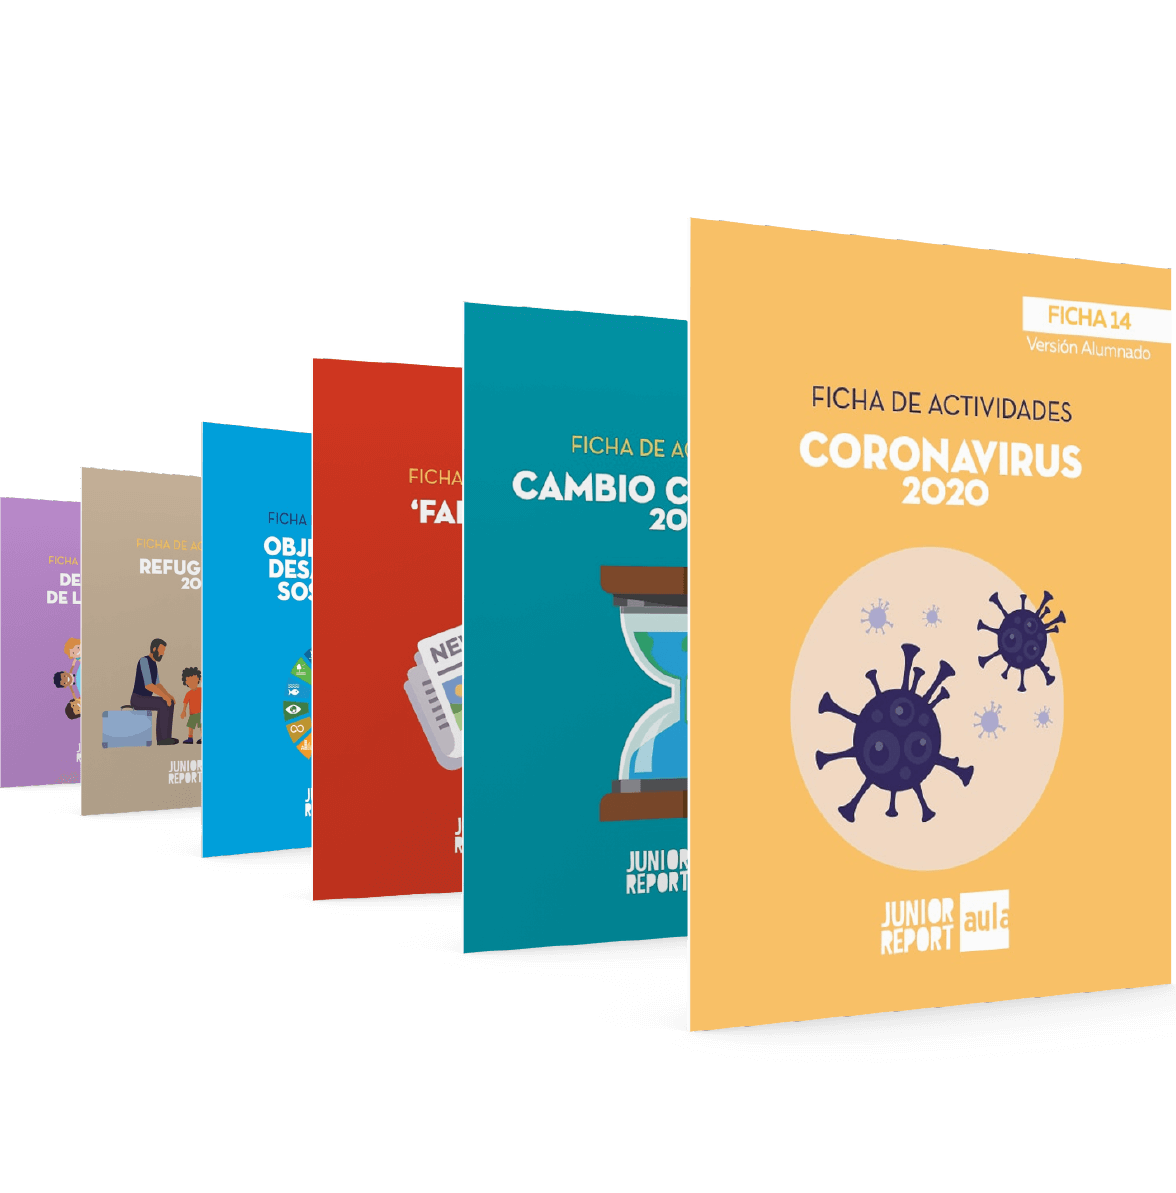 A collection of colorful booklets on various global topics, including 'Coronavirus 2020', displayed in a fan arrangement.